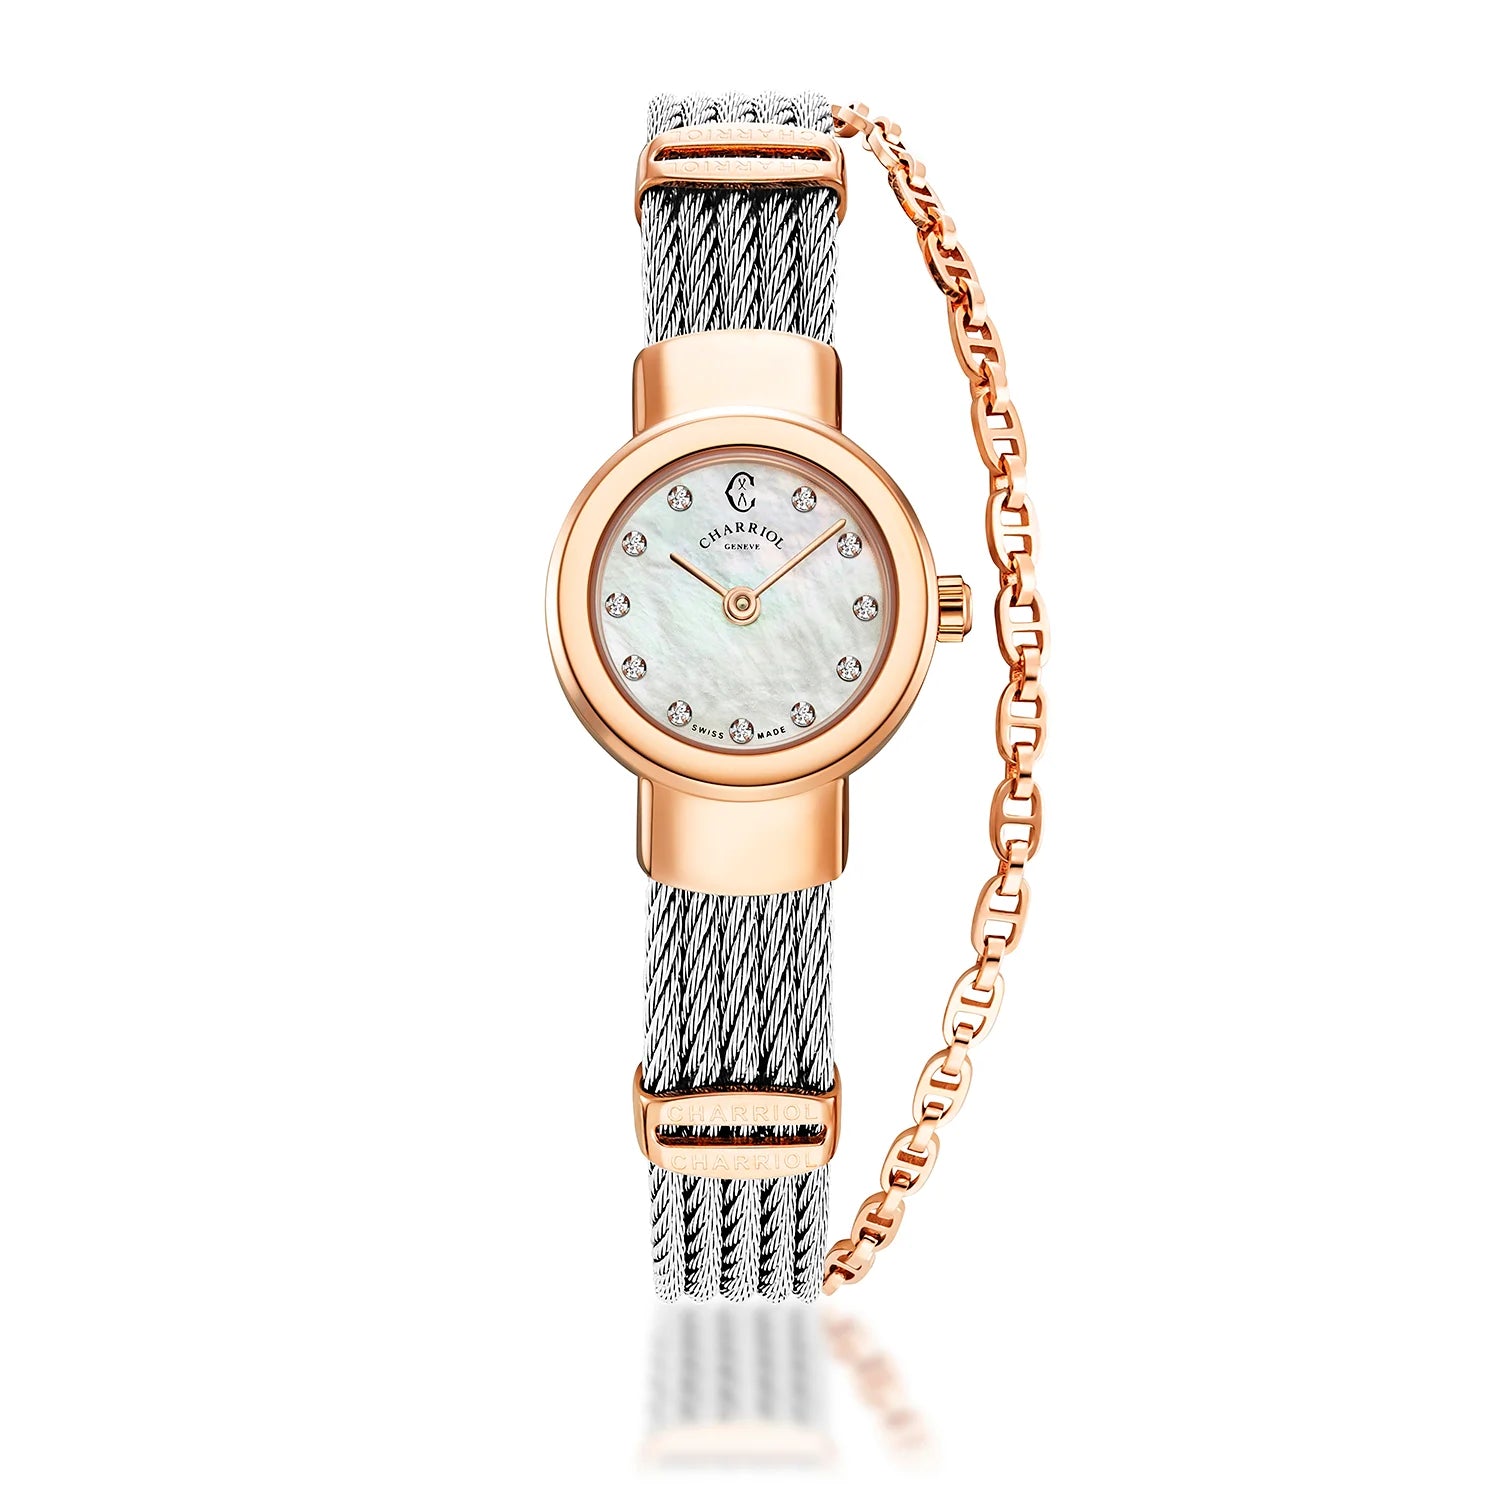 ST TROPEZ, 20MM, QUARTZ CALIBRE, MOTHER-OF-PEARL WITH 11 DIAMONDS DIAL, STEEL ROSE GOLD PVD BEZEL, STEEL CABLE BRACELET - Charriol Geneve -  Watch